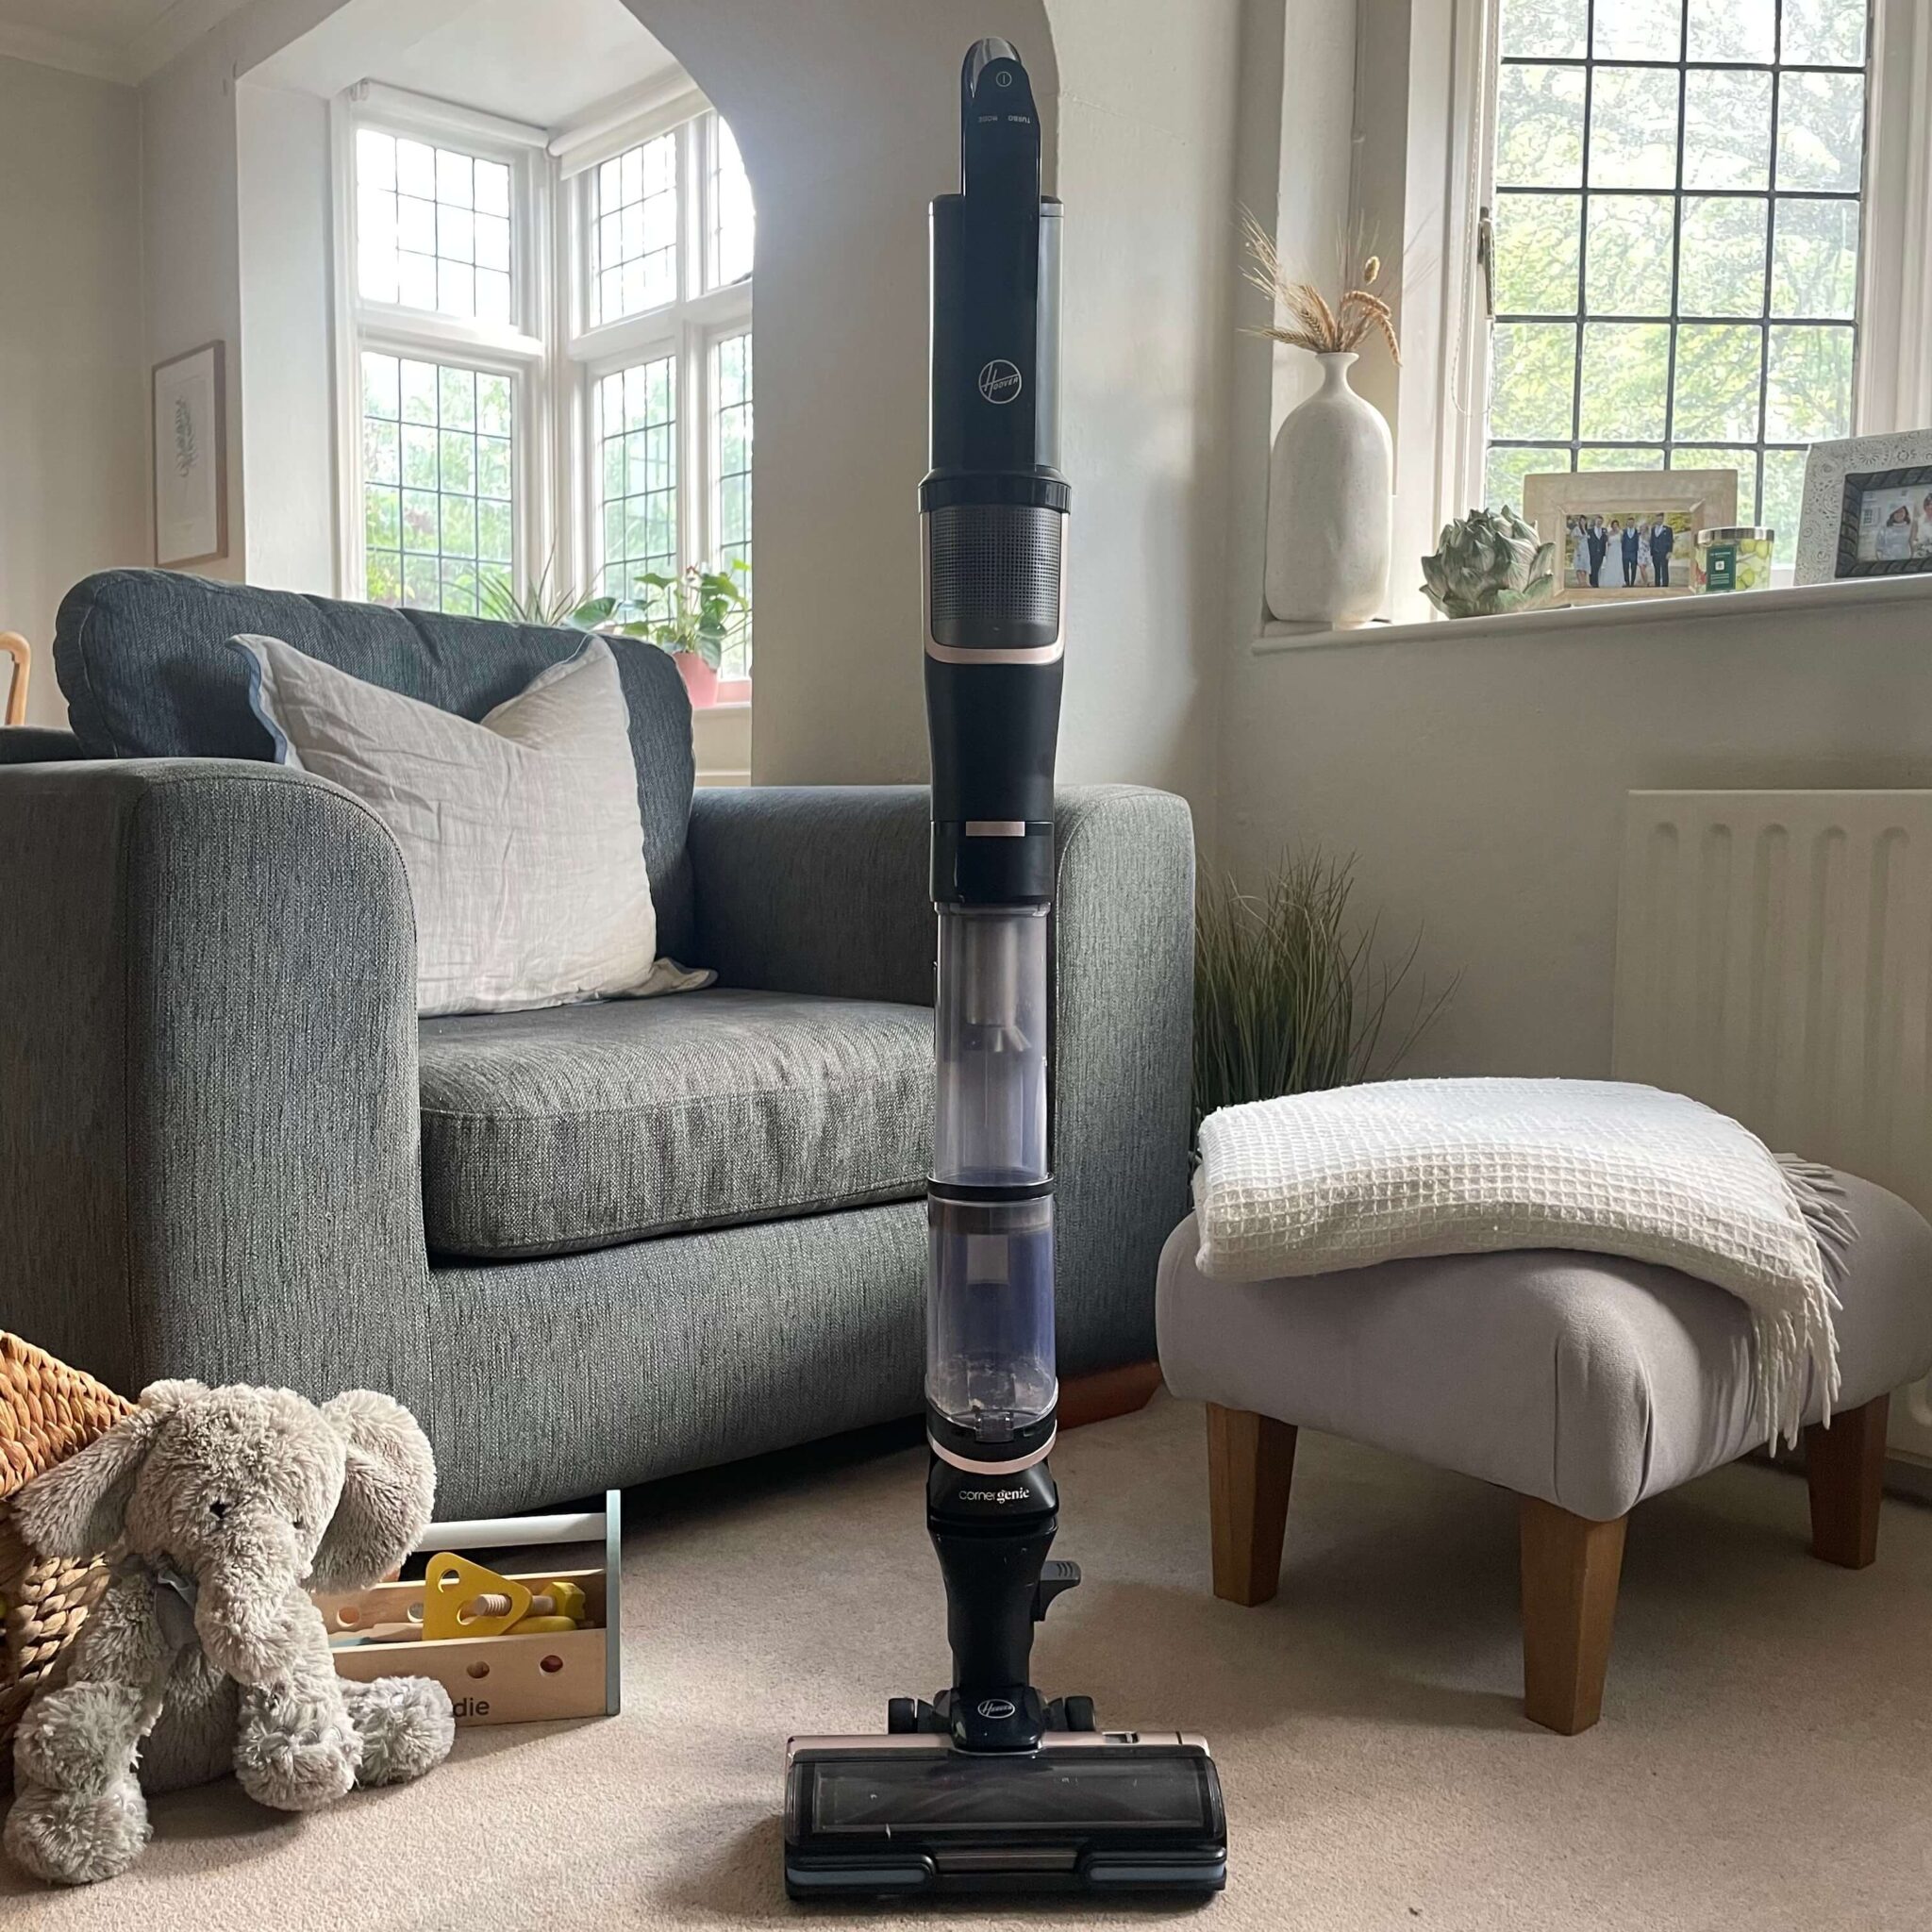 Reviewed by us: HFX Hoover Cordless Pet Vacuum Cleaner with CORNER GENIE™